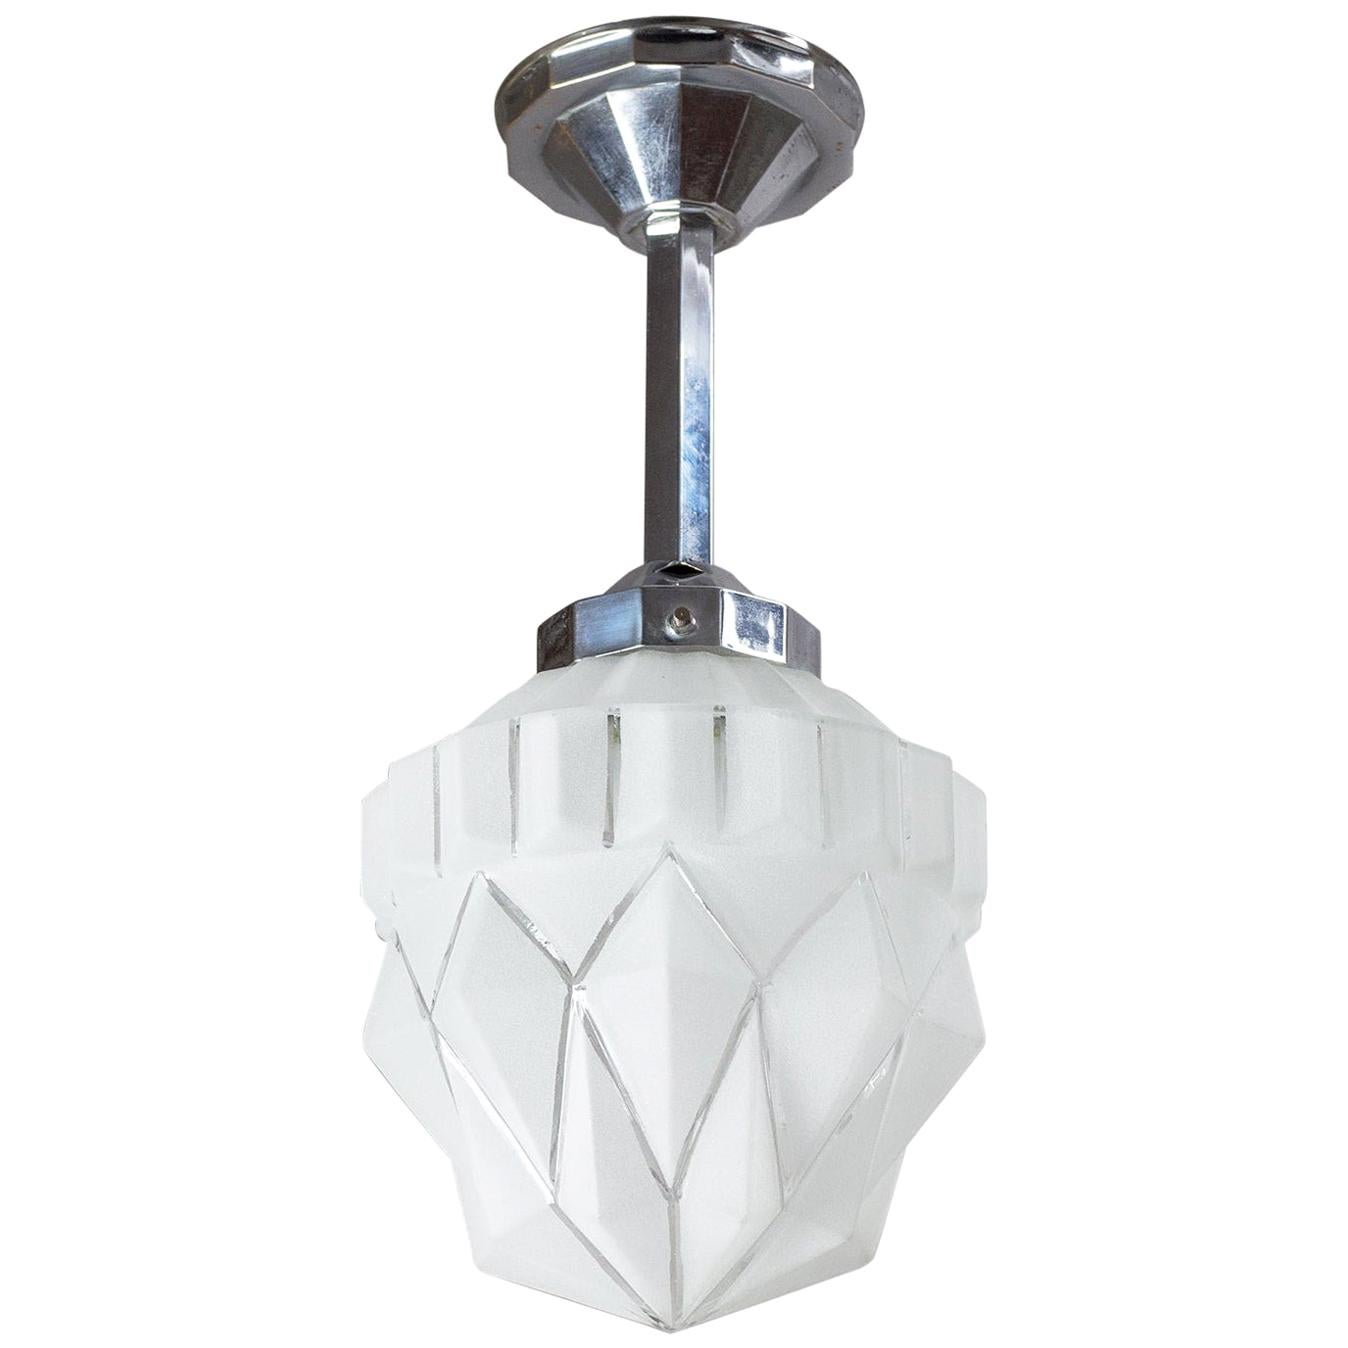 1920s French Art Deco Ceiling Light, Chrome and Frosted Glass